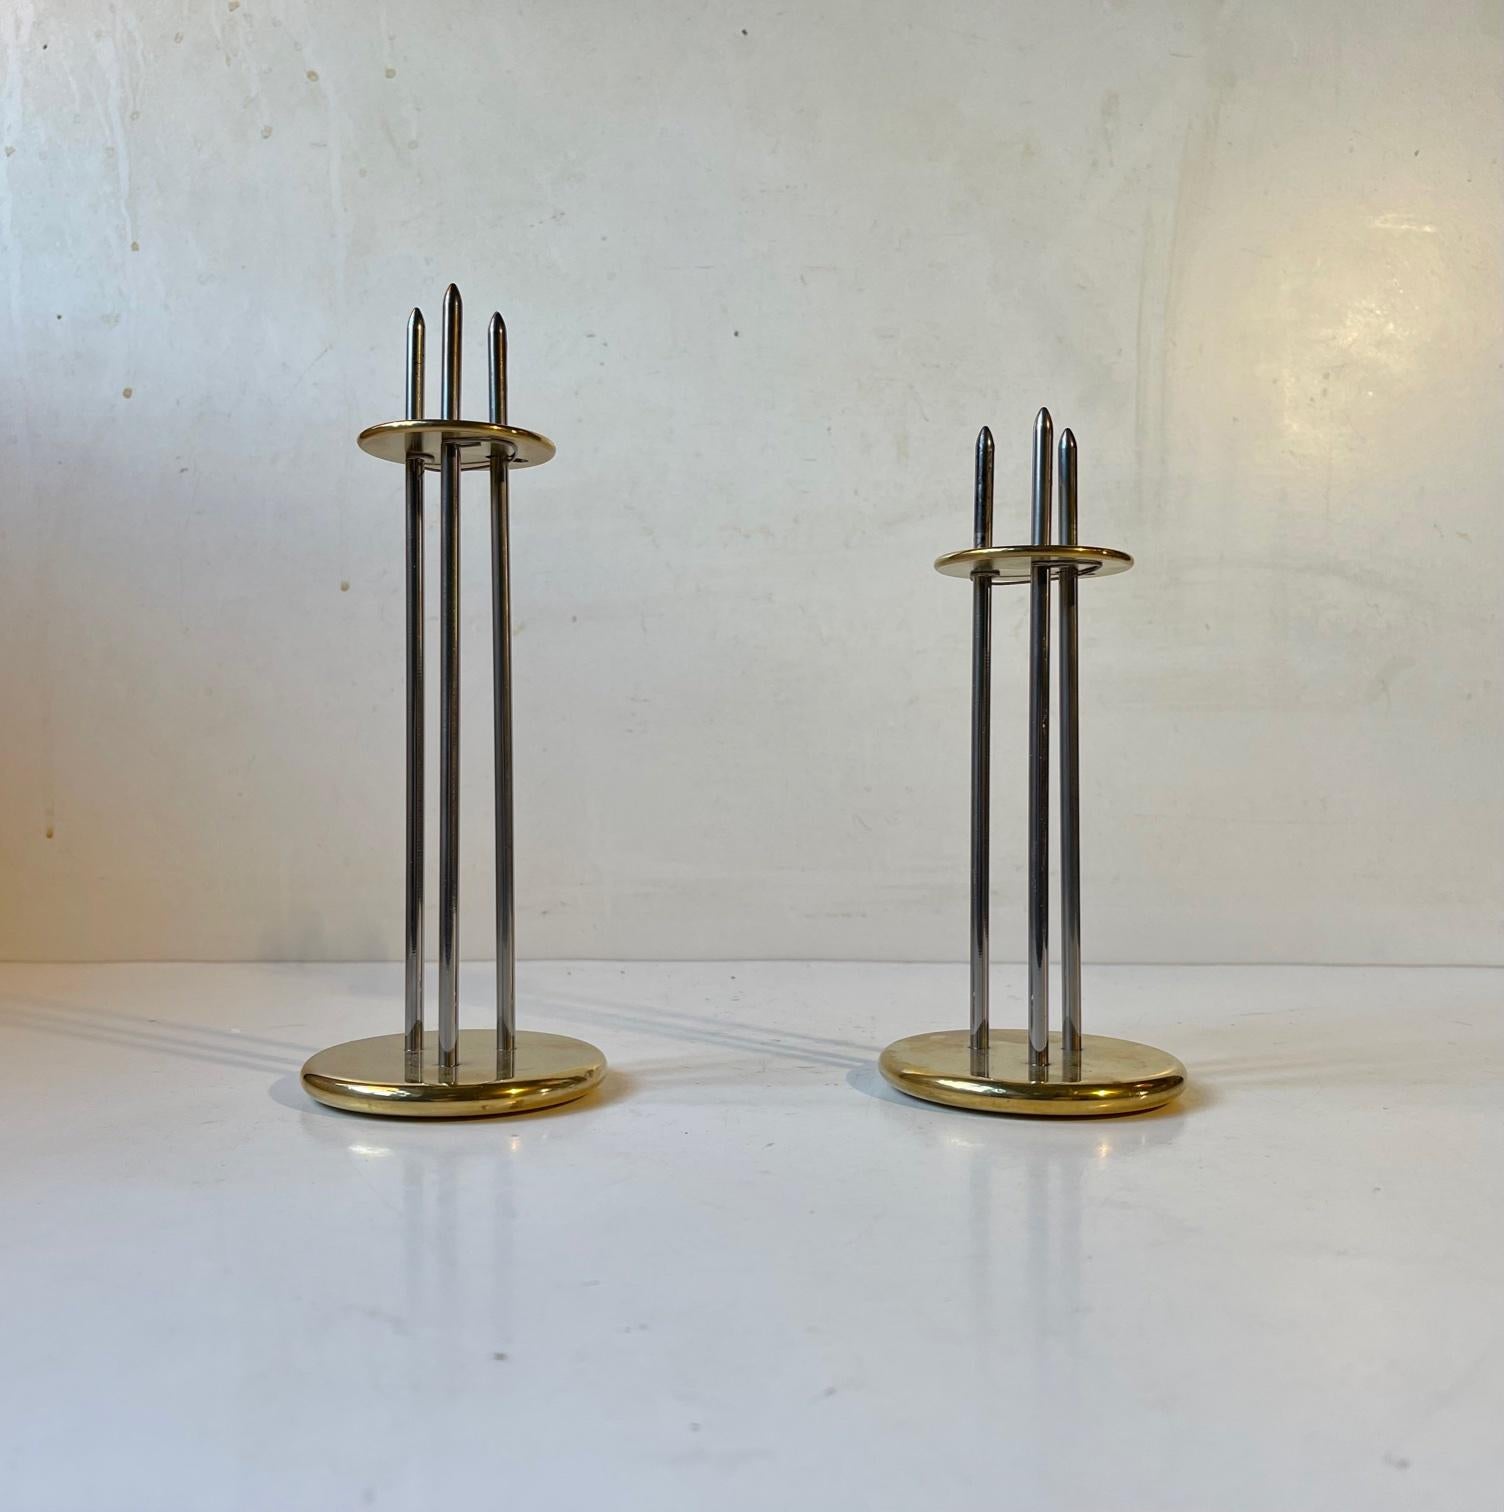 A set of height-adjustable candleholders for regular sized candles. Designed by the danish engineer Peter Seidelin Jessen for his own company Delite during the 1980s or 90s. They are made from mirror-polished stainless steel and gilded brass.